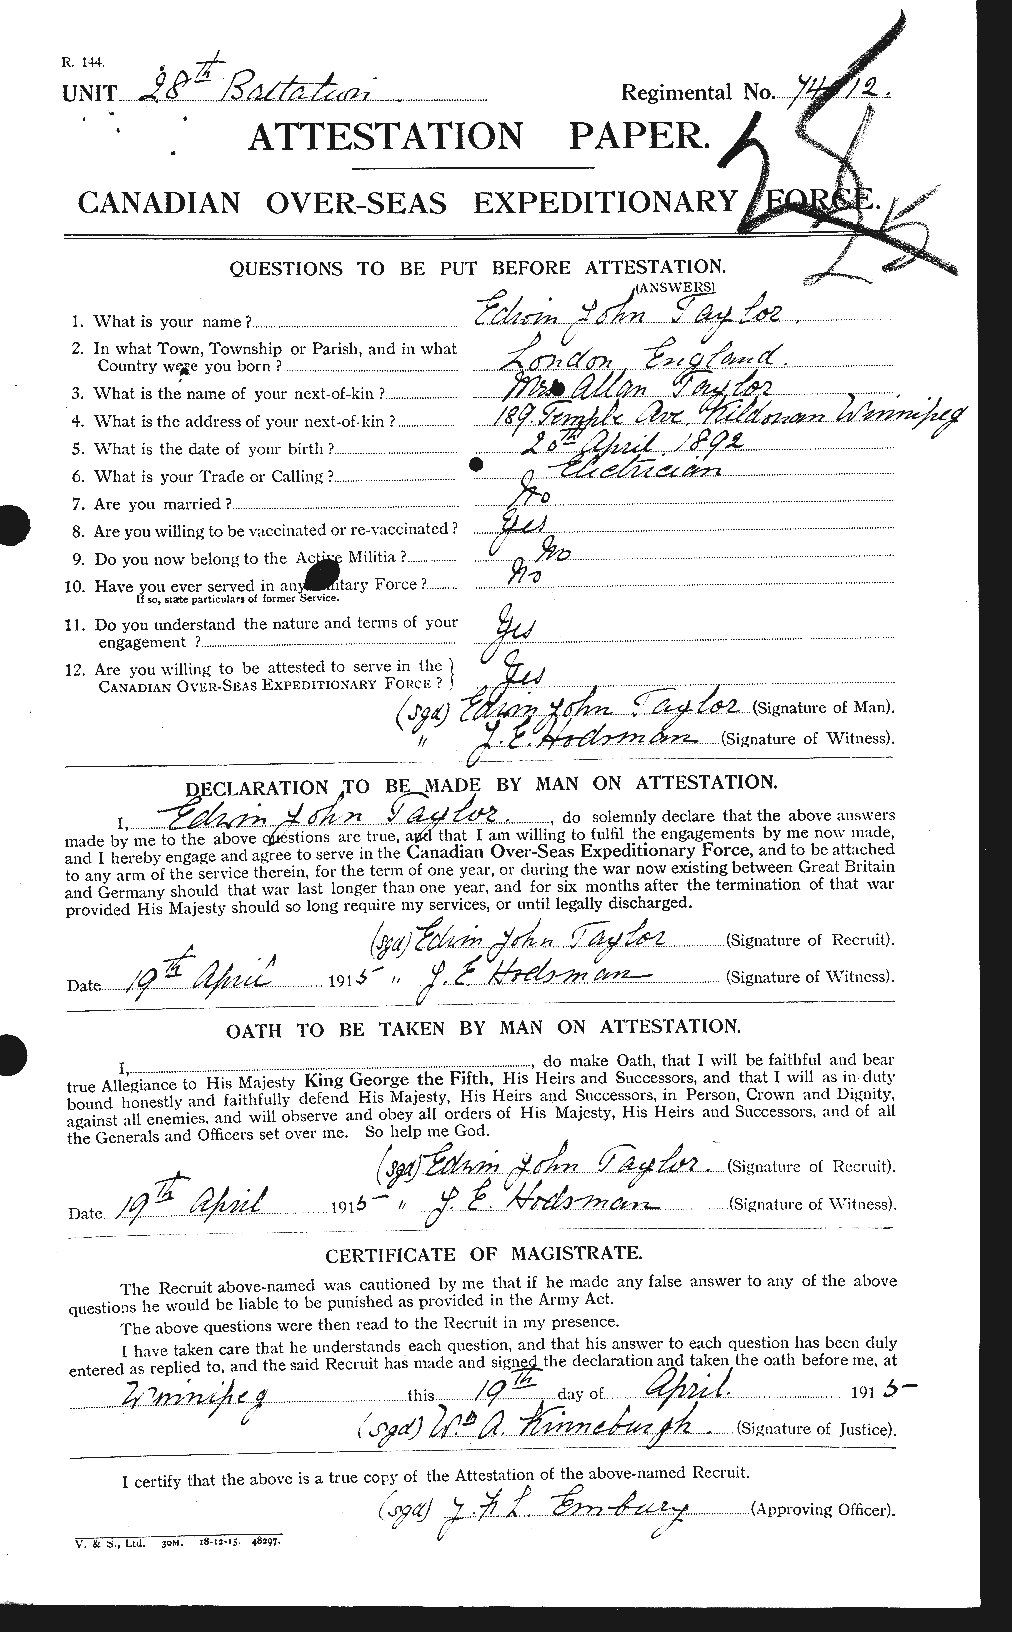 Personnel Records of the First World War - CEF 627343a